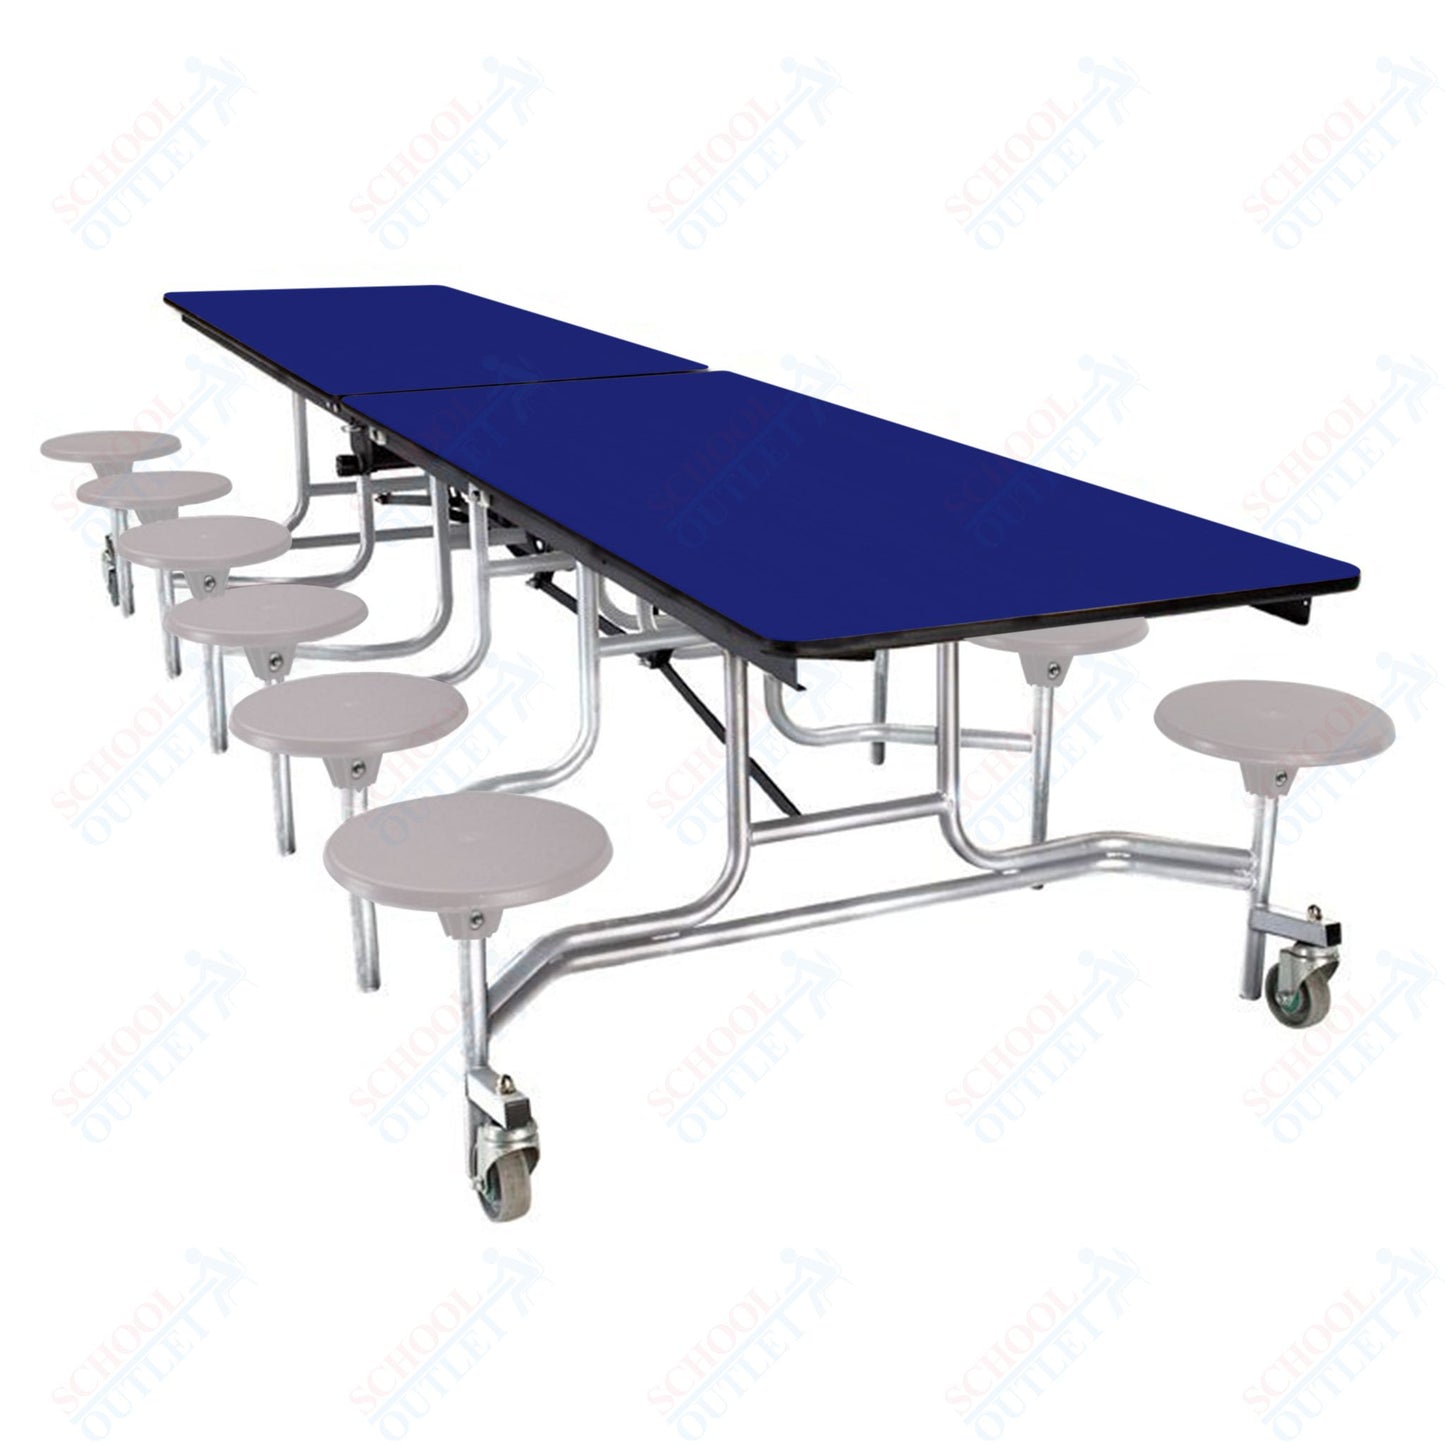 NPS Mobile Cafeteria Table - 30" W x 10' L - 12 Stools  - Plywood Core - T-Molding Edge - Chrome Frame